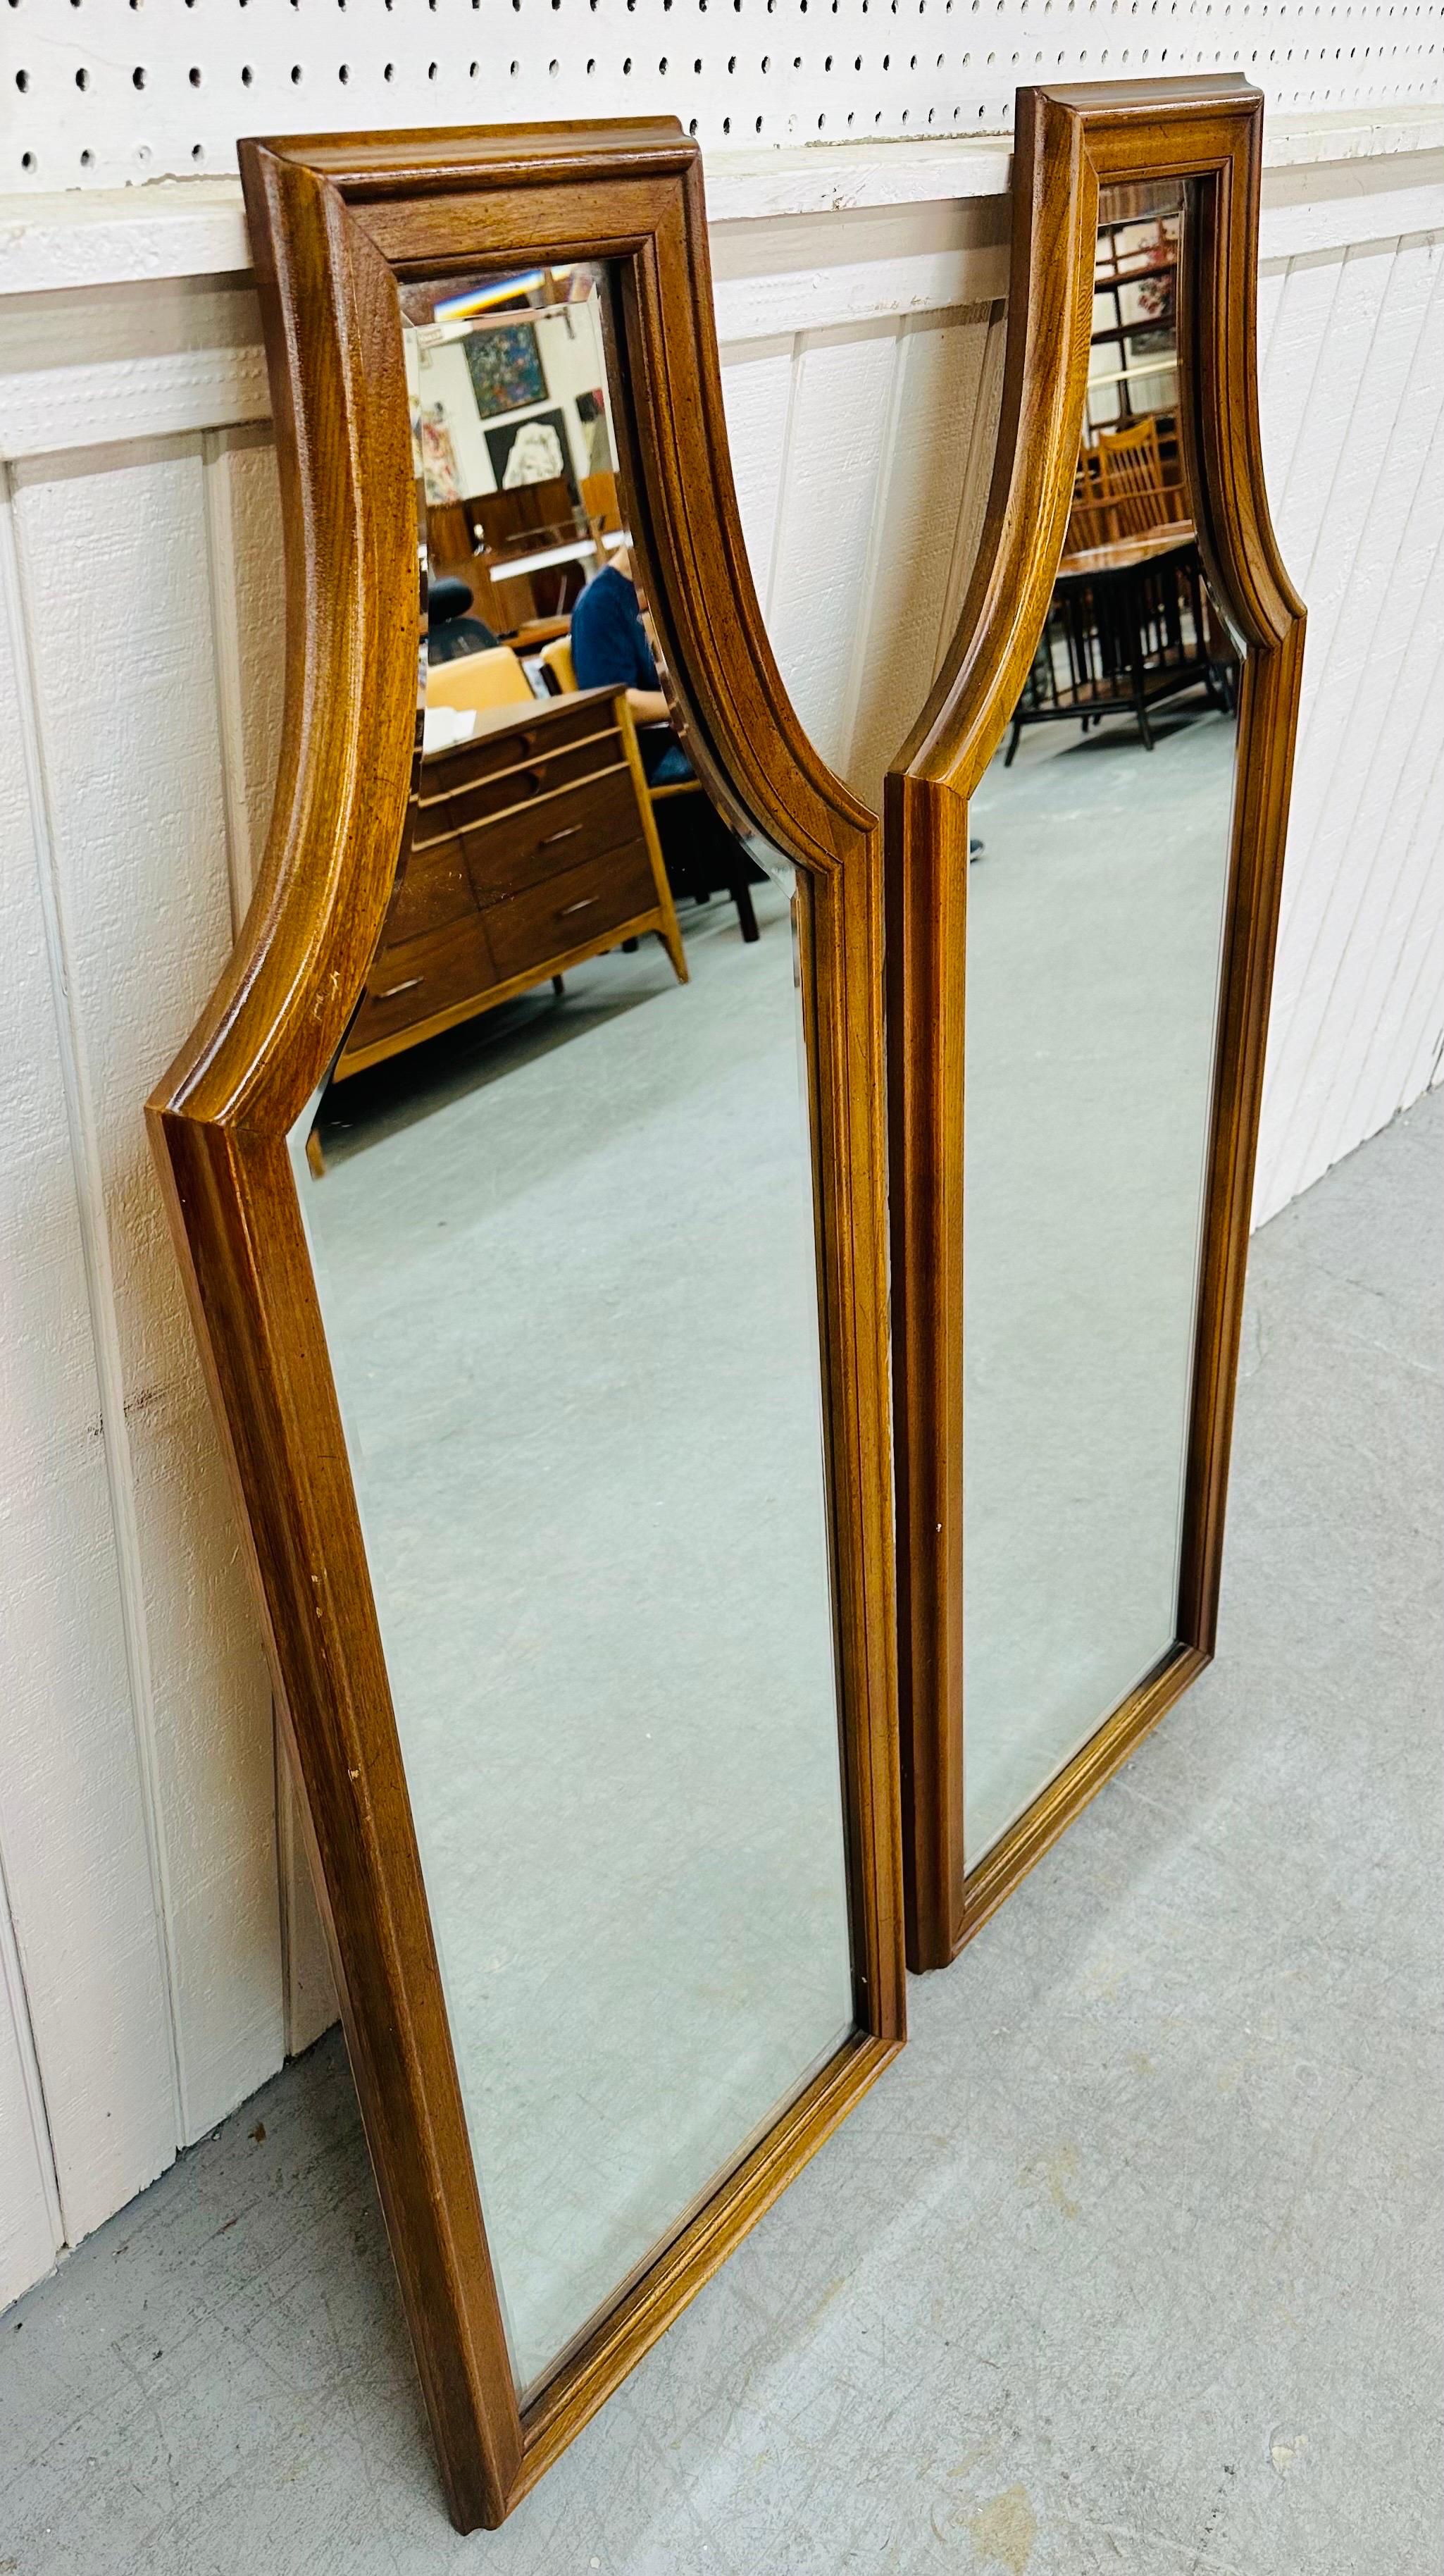 This listing is for a pair of Mid-Century Modern Walnut Wall Mirrors. Featuring a gothic coffin design, beveled mirror, and a beautiful walnut finish. This is an exceptional combination of quality and design!